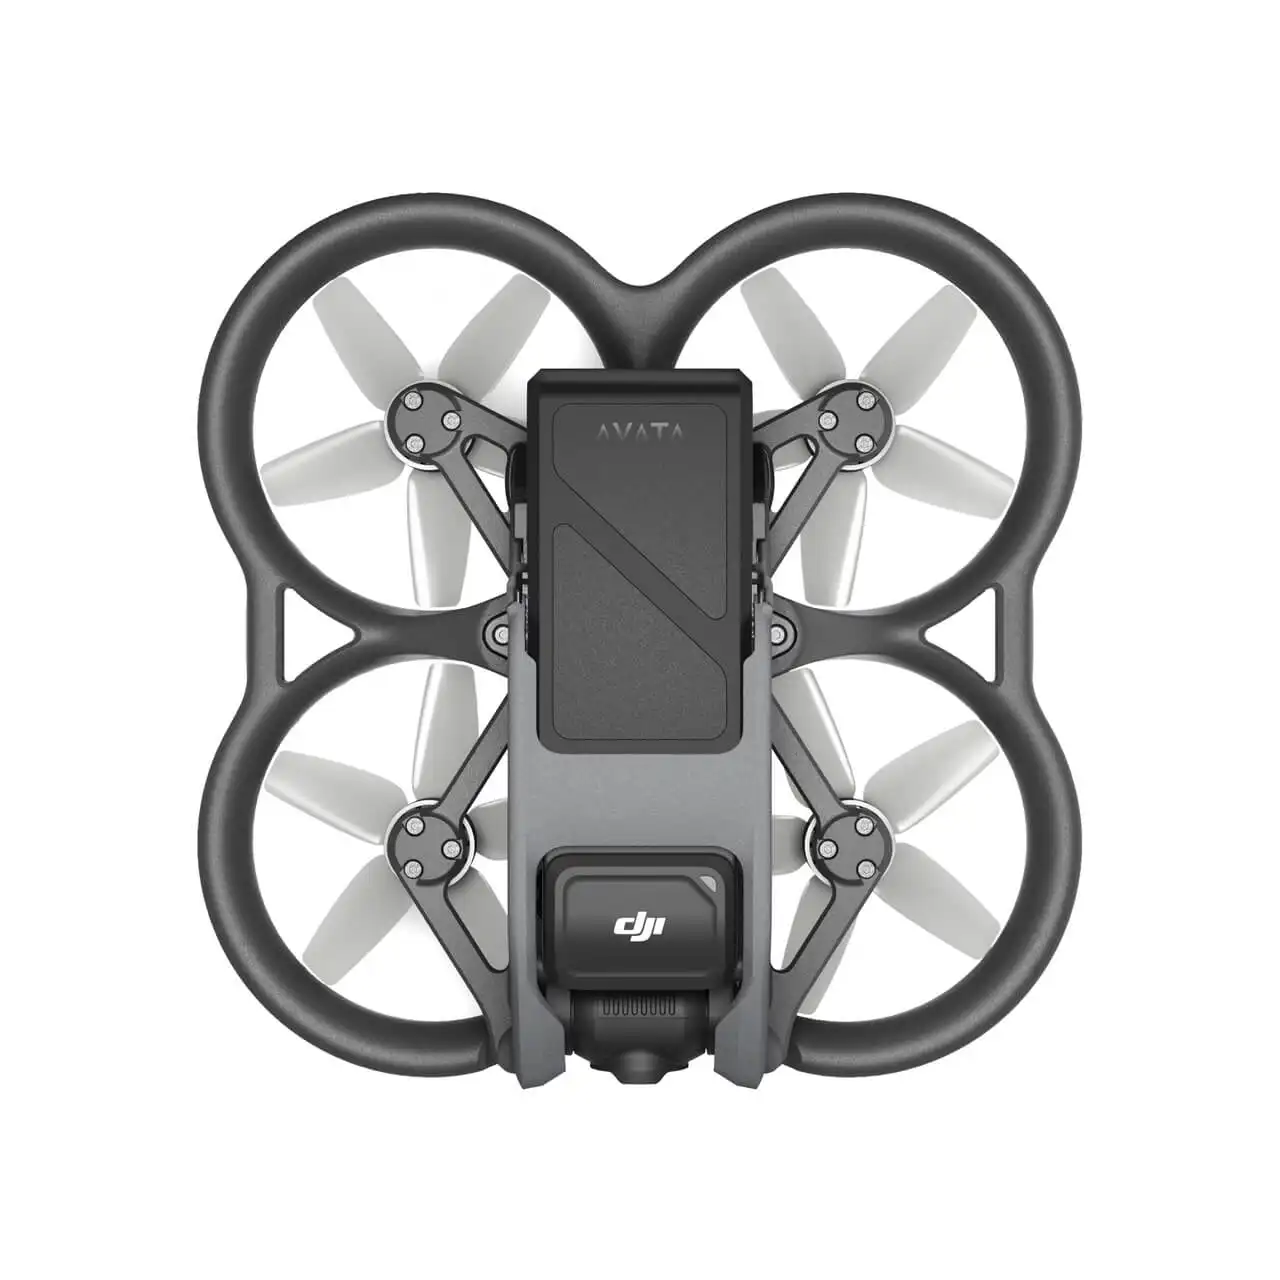 DJI Avata Pro View Combo or Fly Smart Combo First-Person View Drone UAV Quadcopter with 4K Stabilized Video Lightweight